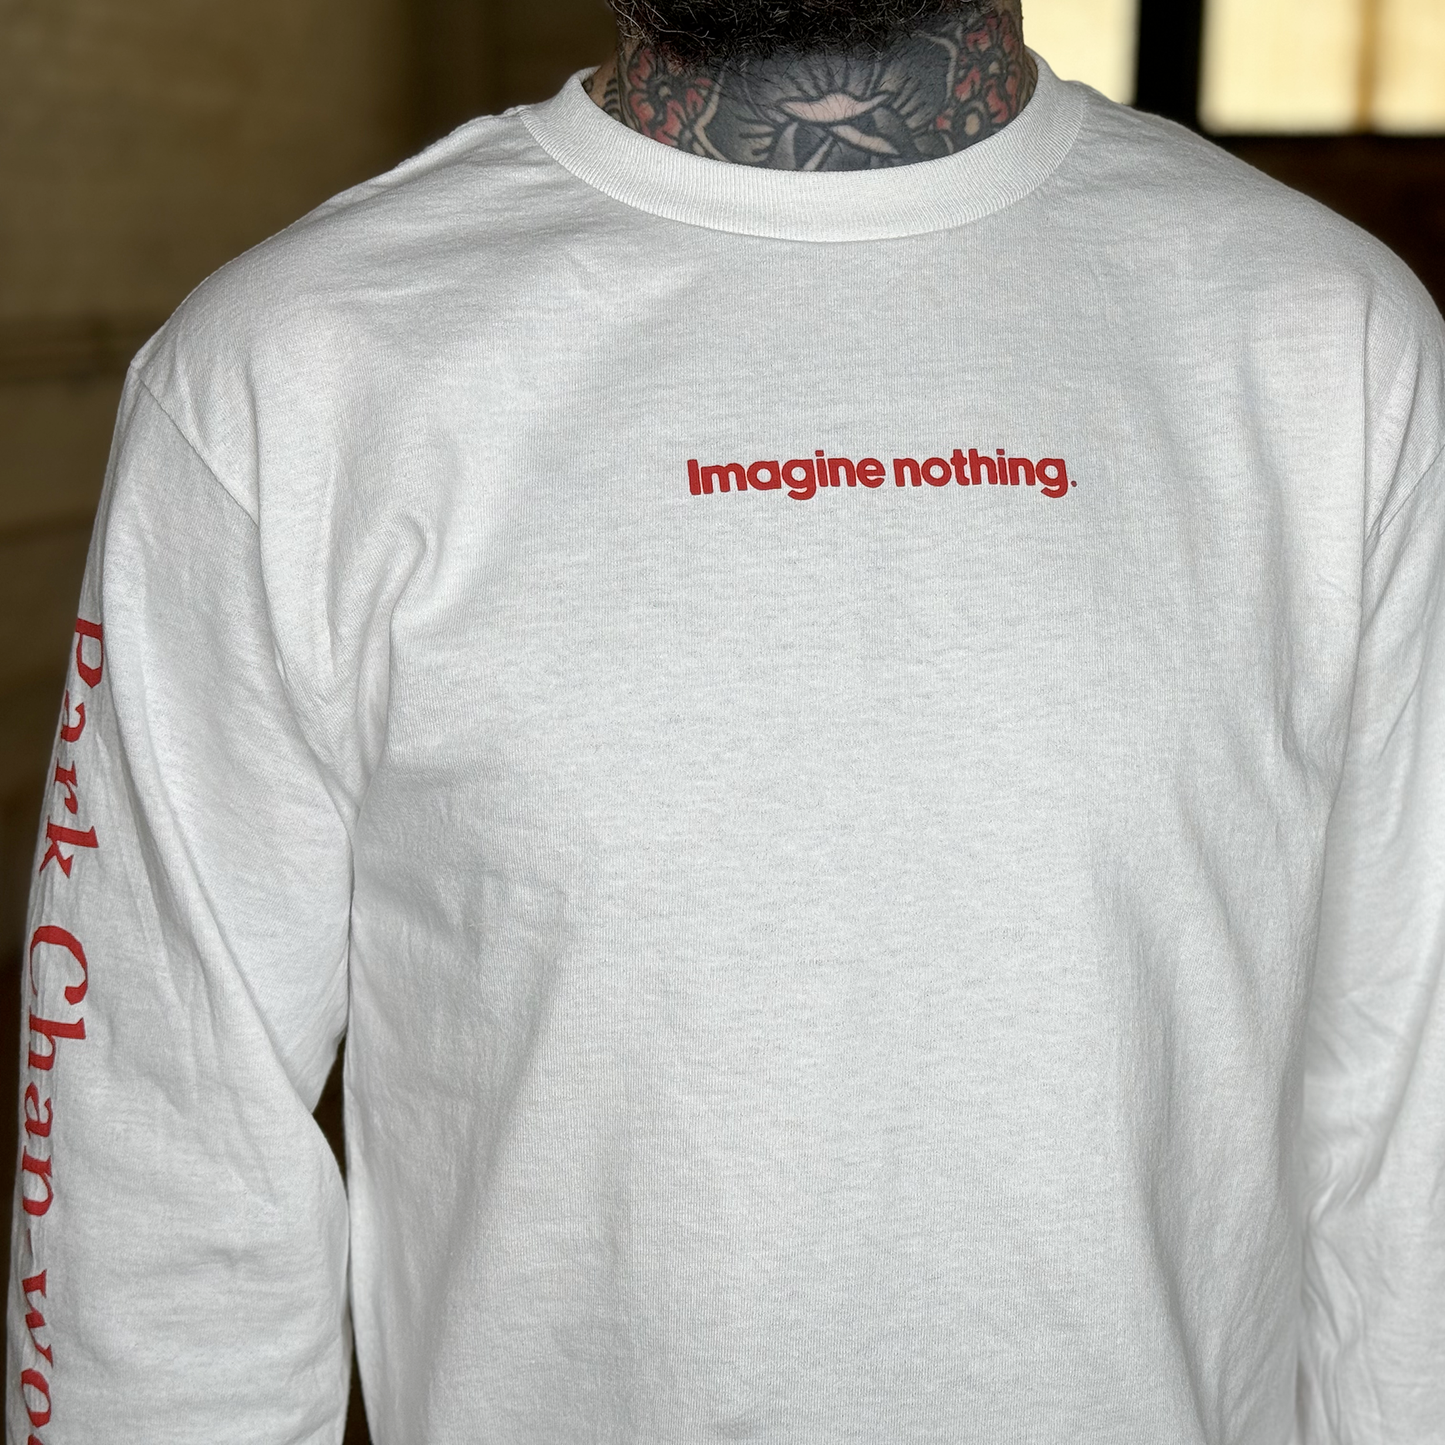 Zoomed in model photo of the front of the shirt, with the left sleeve slightly visible. The front of the shirt reads "Imagine nothing." in a very small, centered, red text.